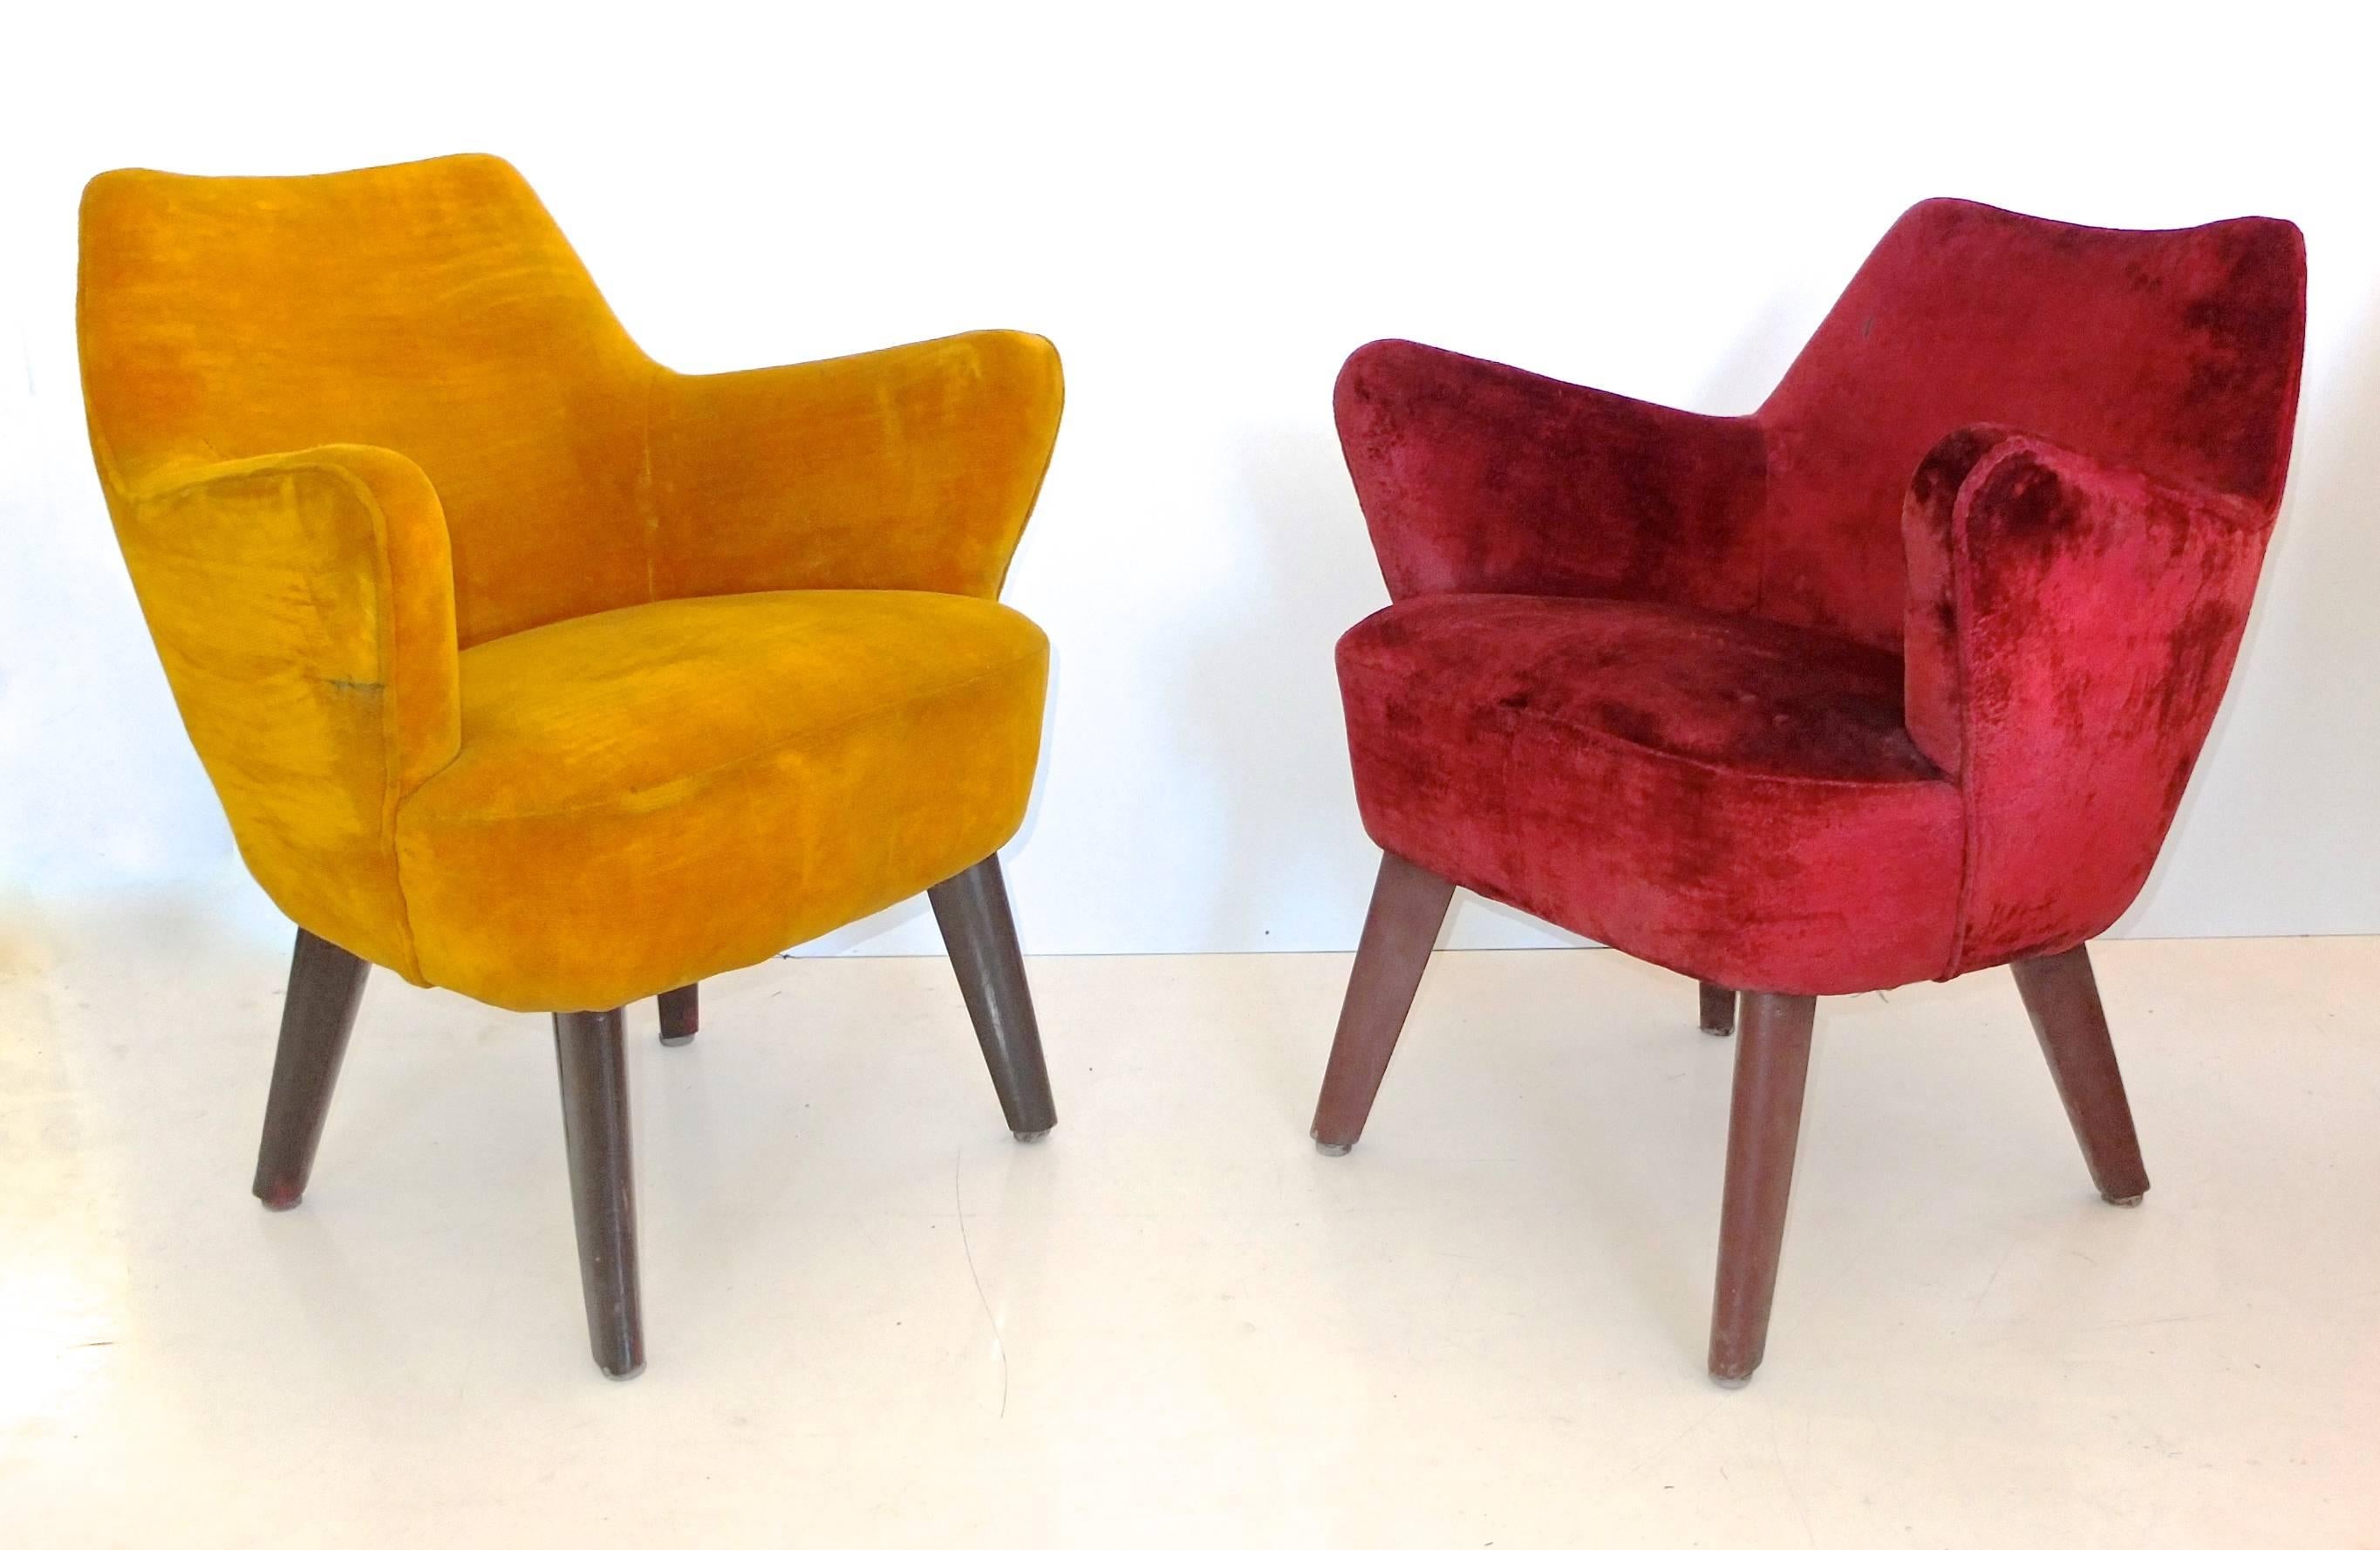 Mahogany Gio Ponti Chairs from Augustus Ocean Liner - Pairs X3 For Sale